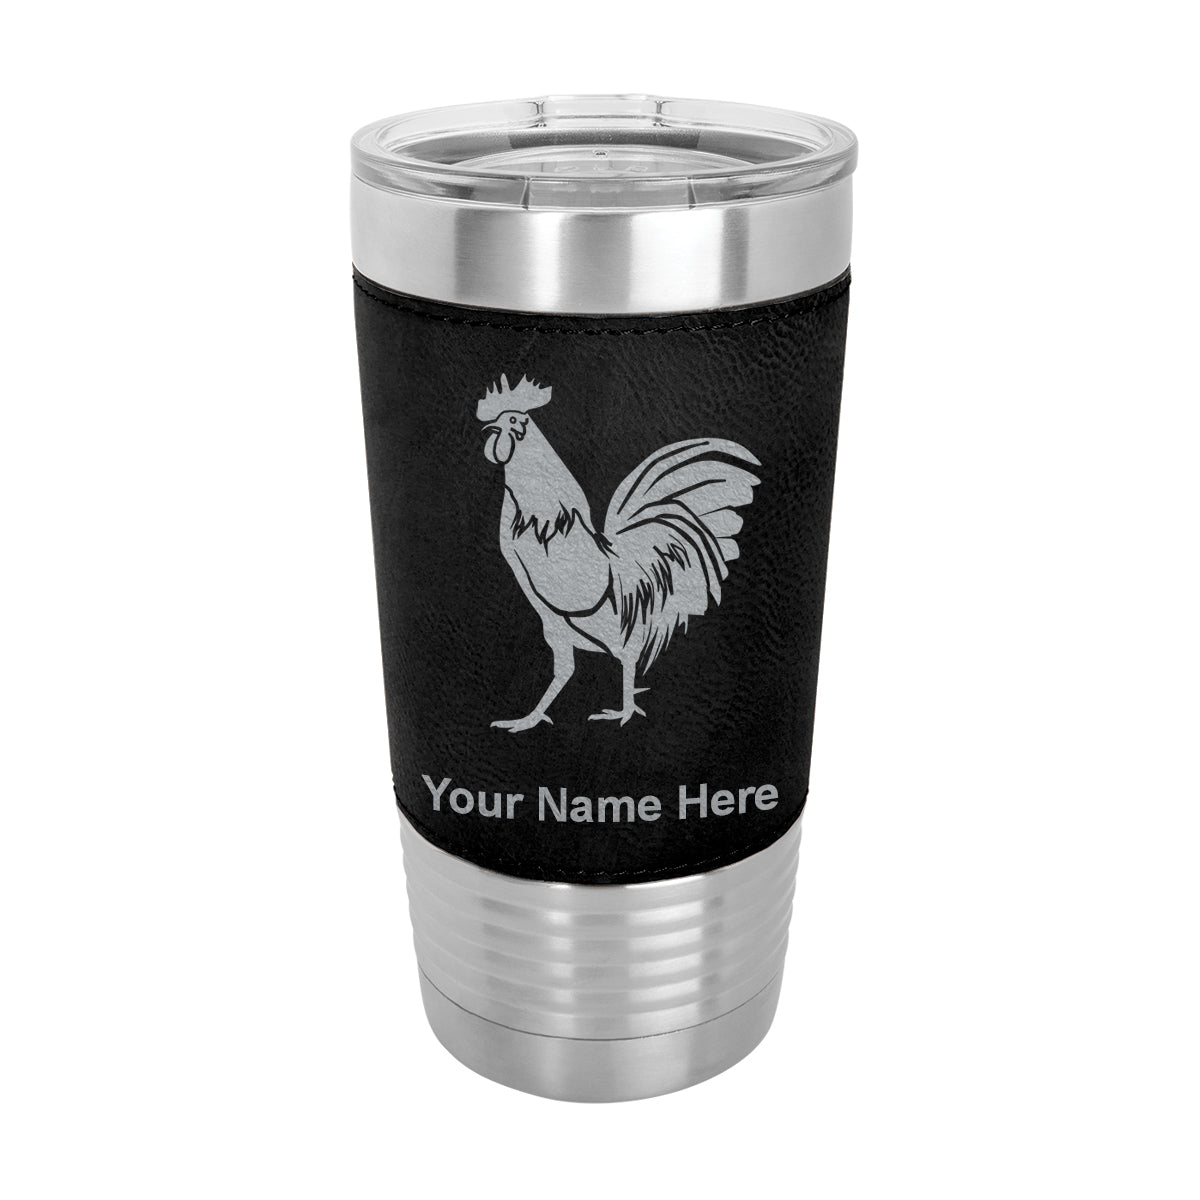 20oz Faux Leather Tumbler Mug, Rooster, Personalized Engraving Included - LaserGram Custom Engraved Gifts